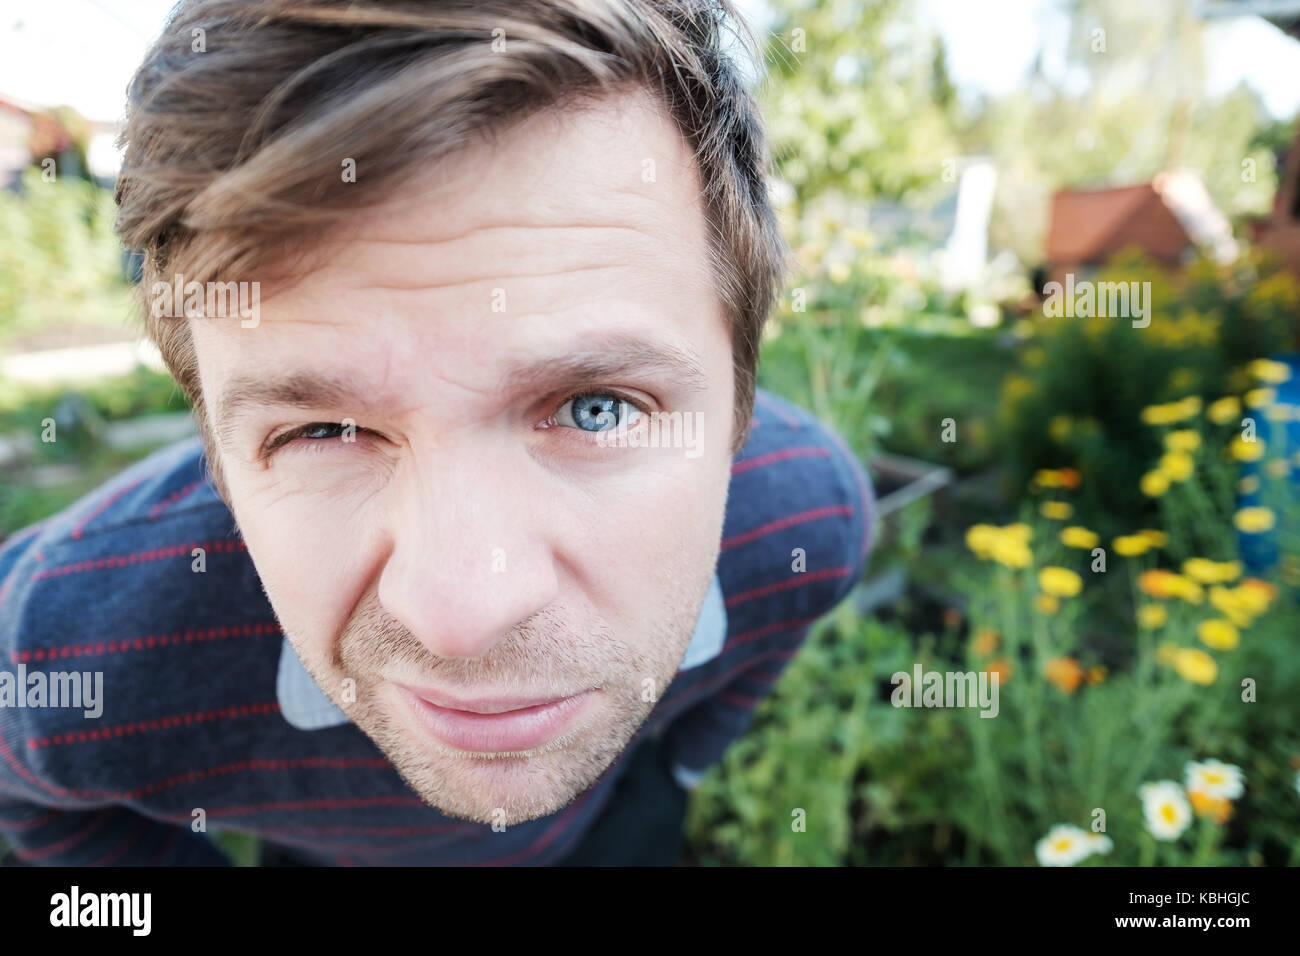 Portrait of a man with blue eyes looking at the camera with questioning and suspicious facial expression Stock Photo